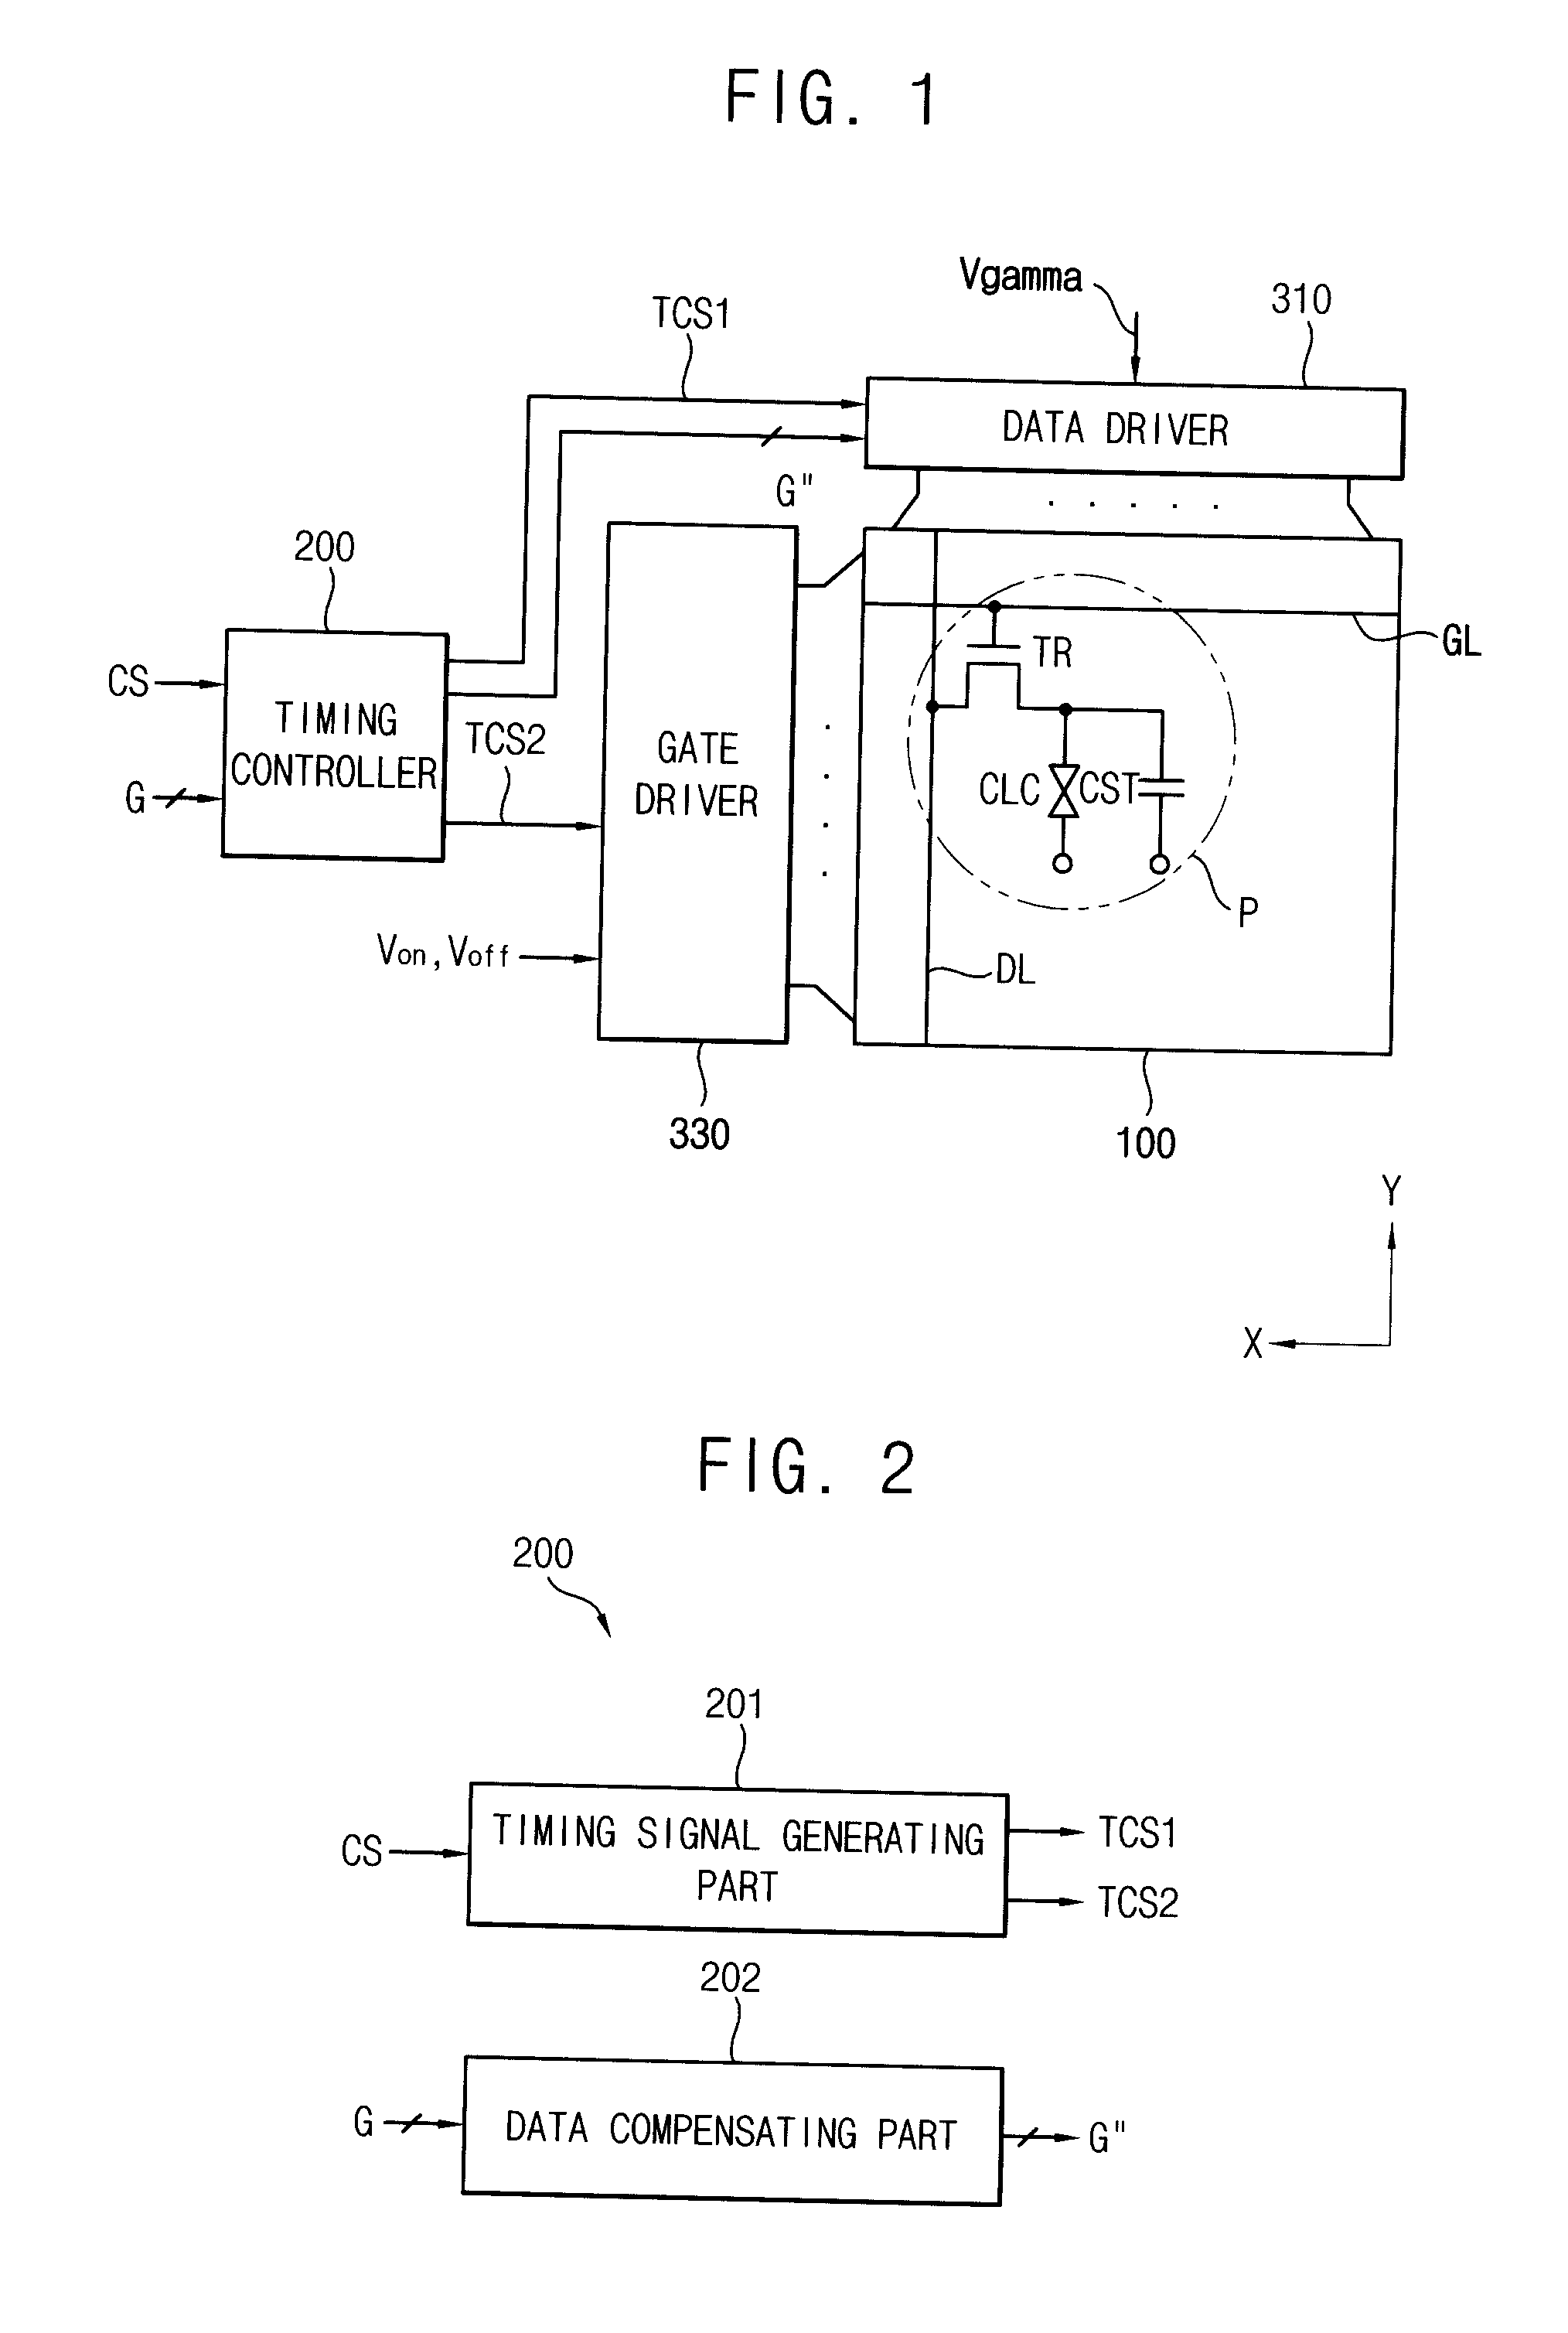 Method of compensating data, data compensating apparatus for performing the method and display apparatus having the compensating apparatus